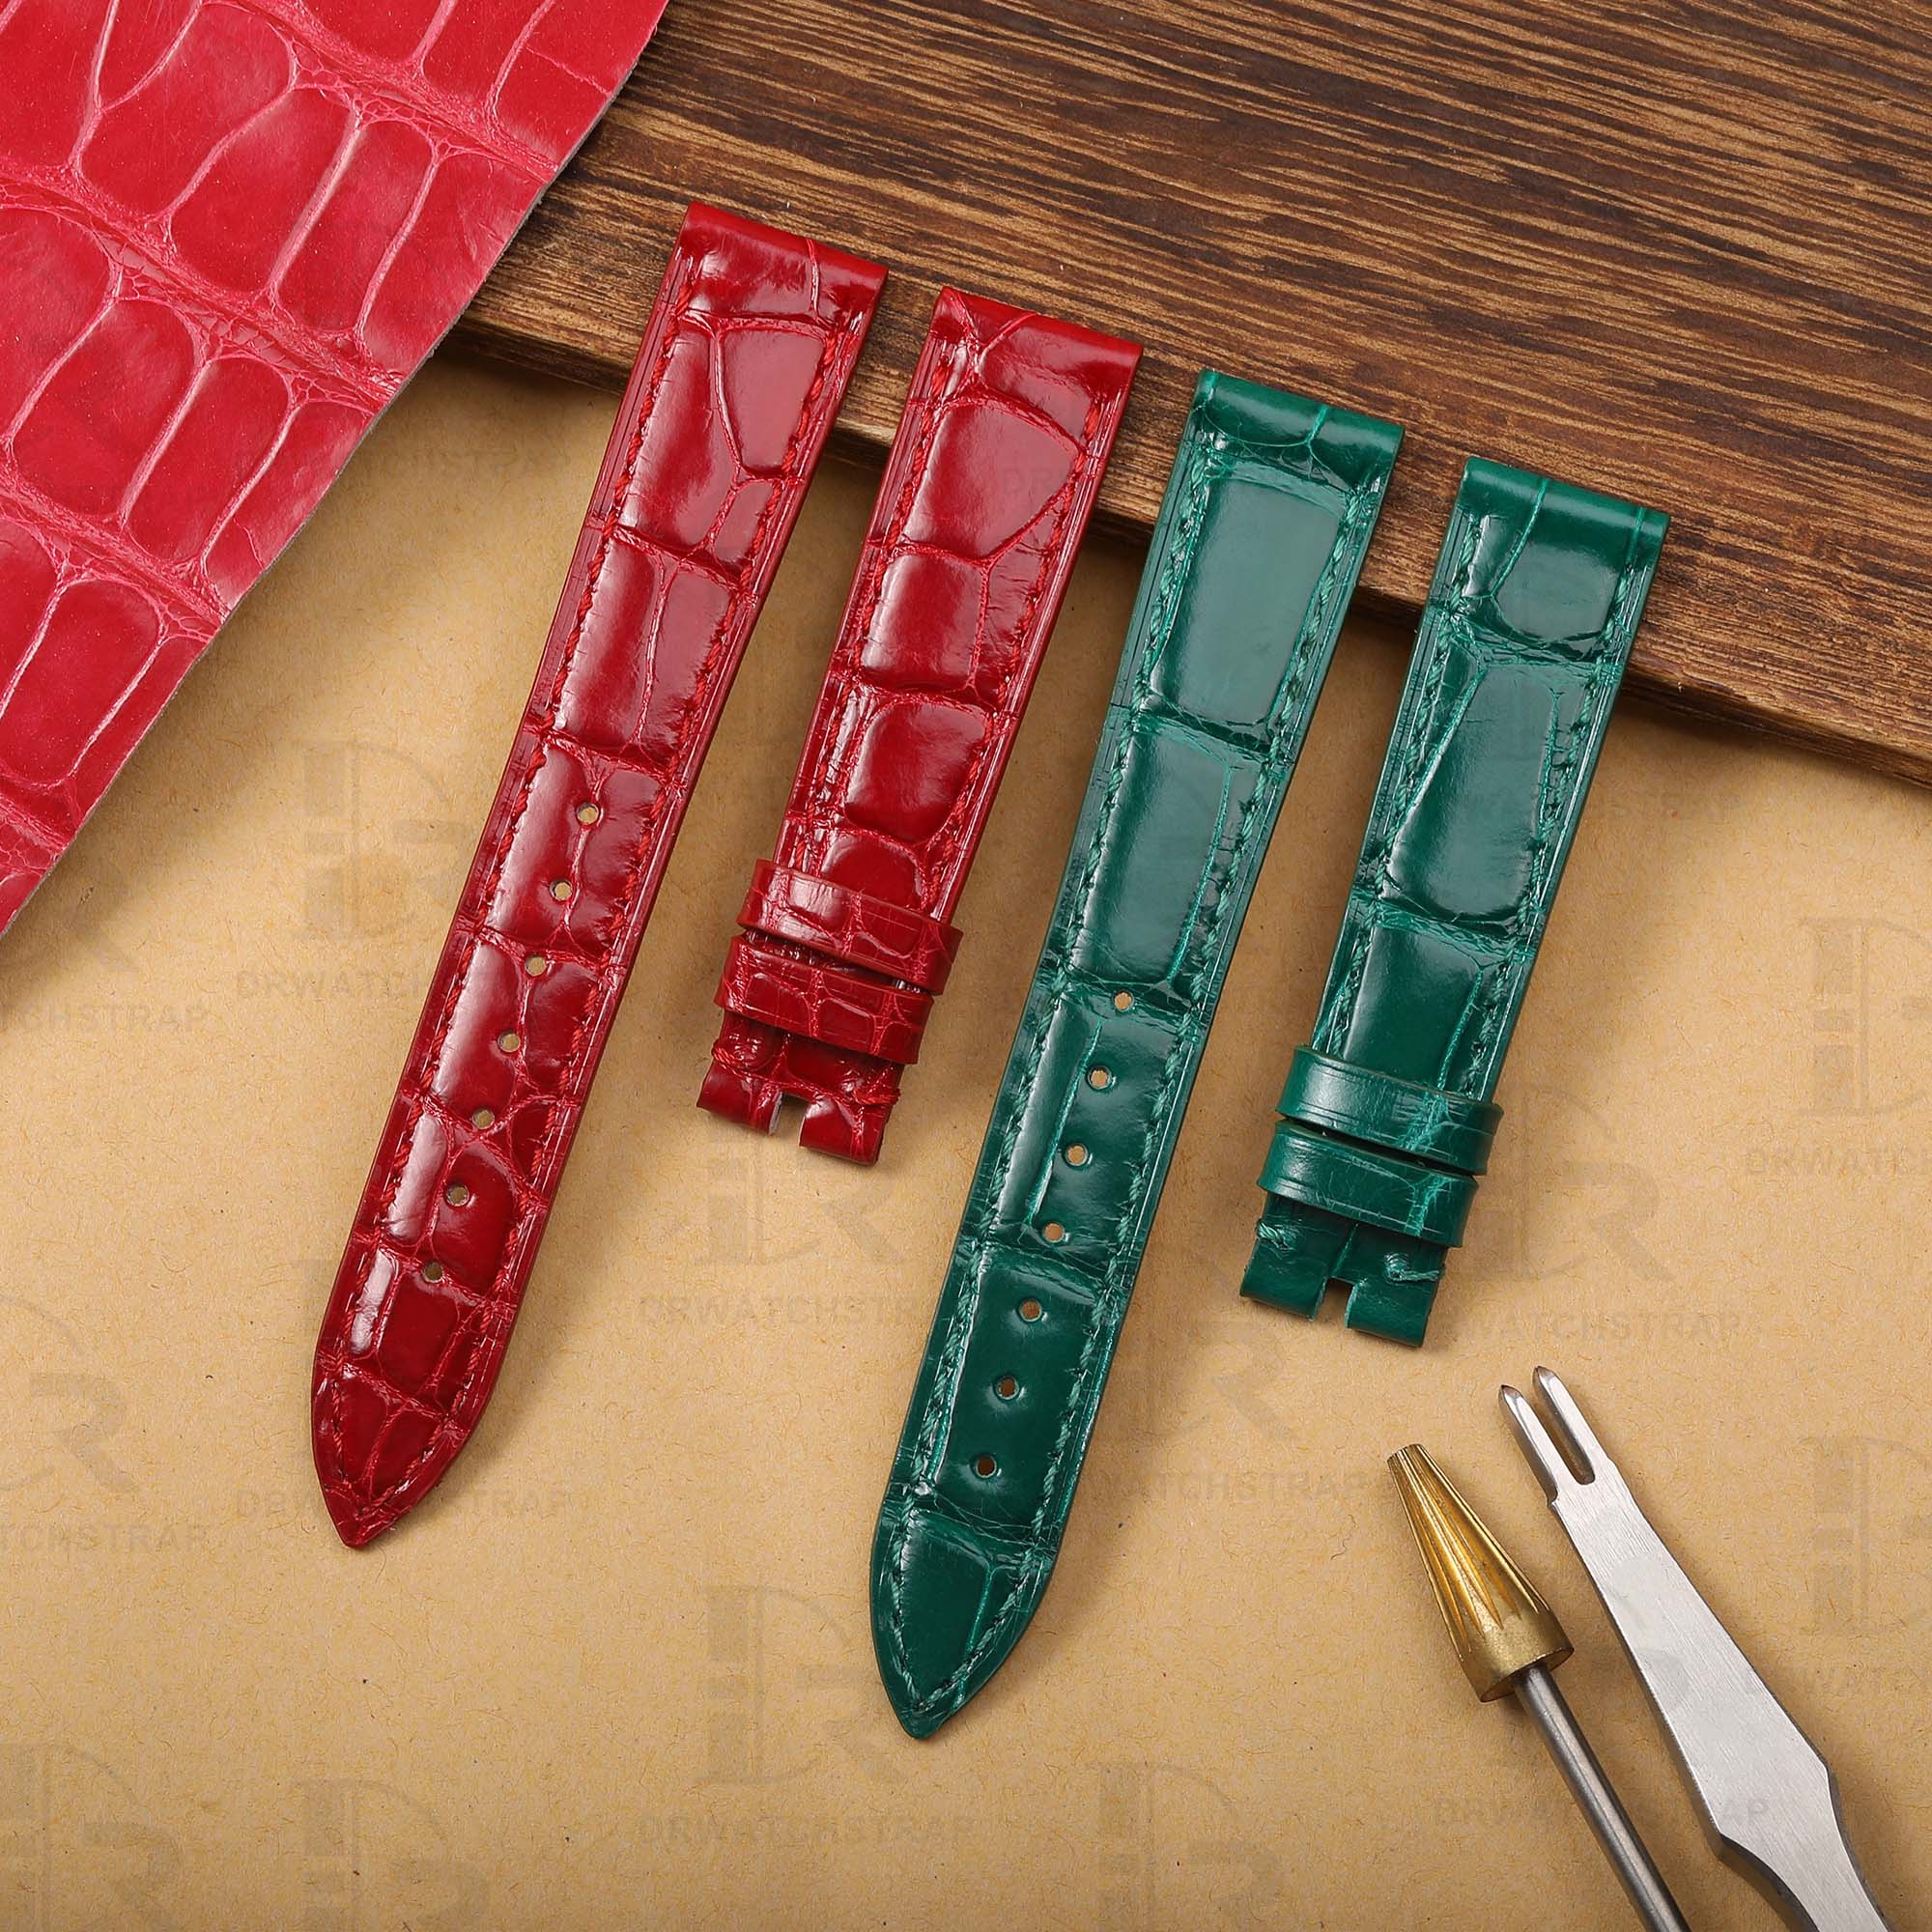 Buy custom Rolex Cellini Vintage straps Red Green 16mm leather watch band for sale